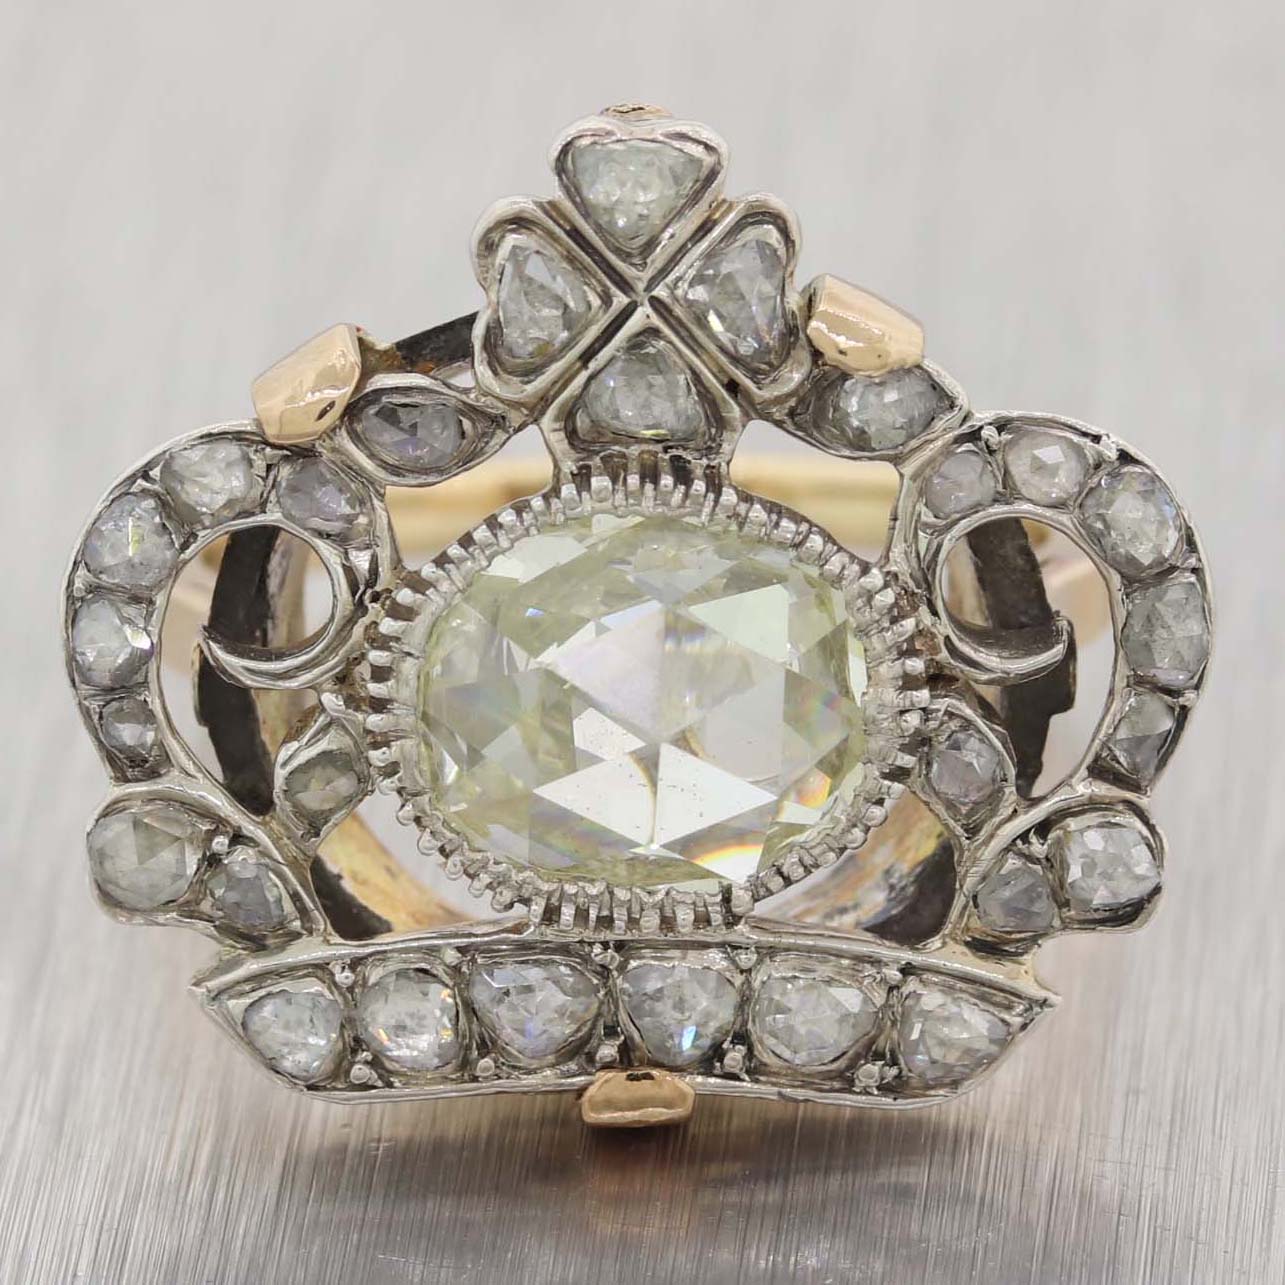 1850s Imperial Russian Sterling Silver 14k Yellow Gold Rose Cut Diamond Crown Ring